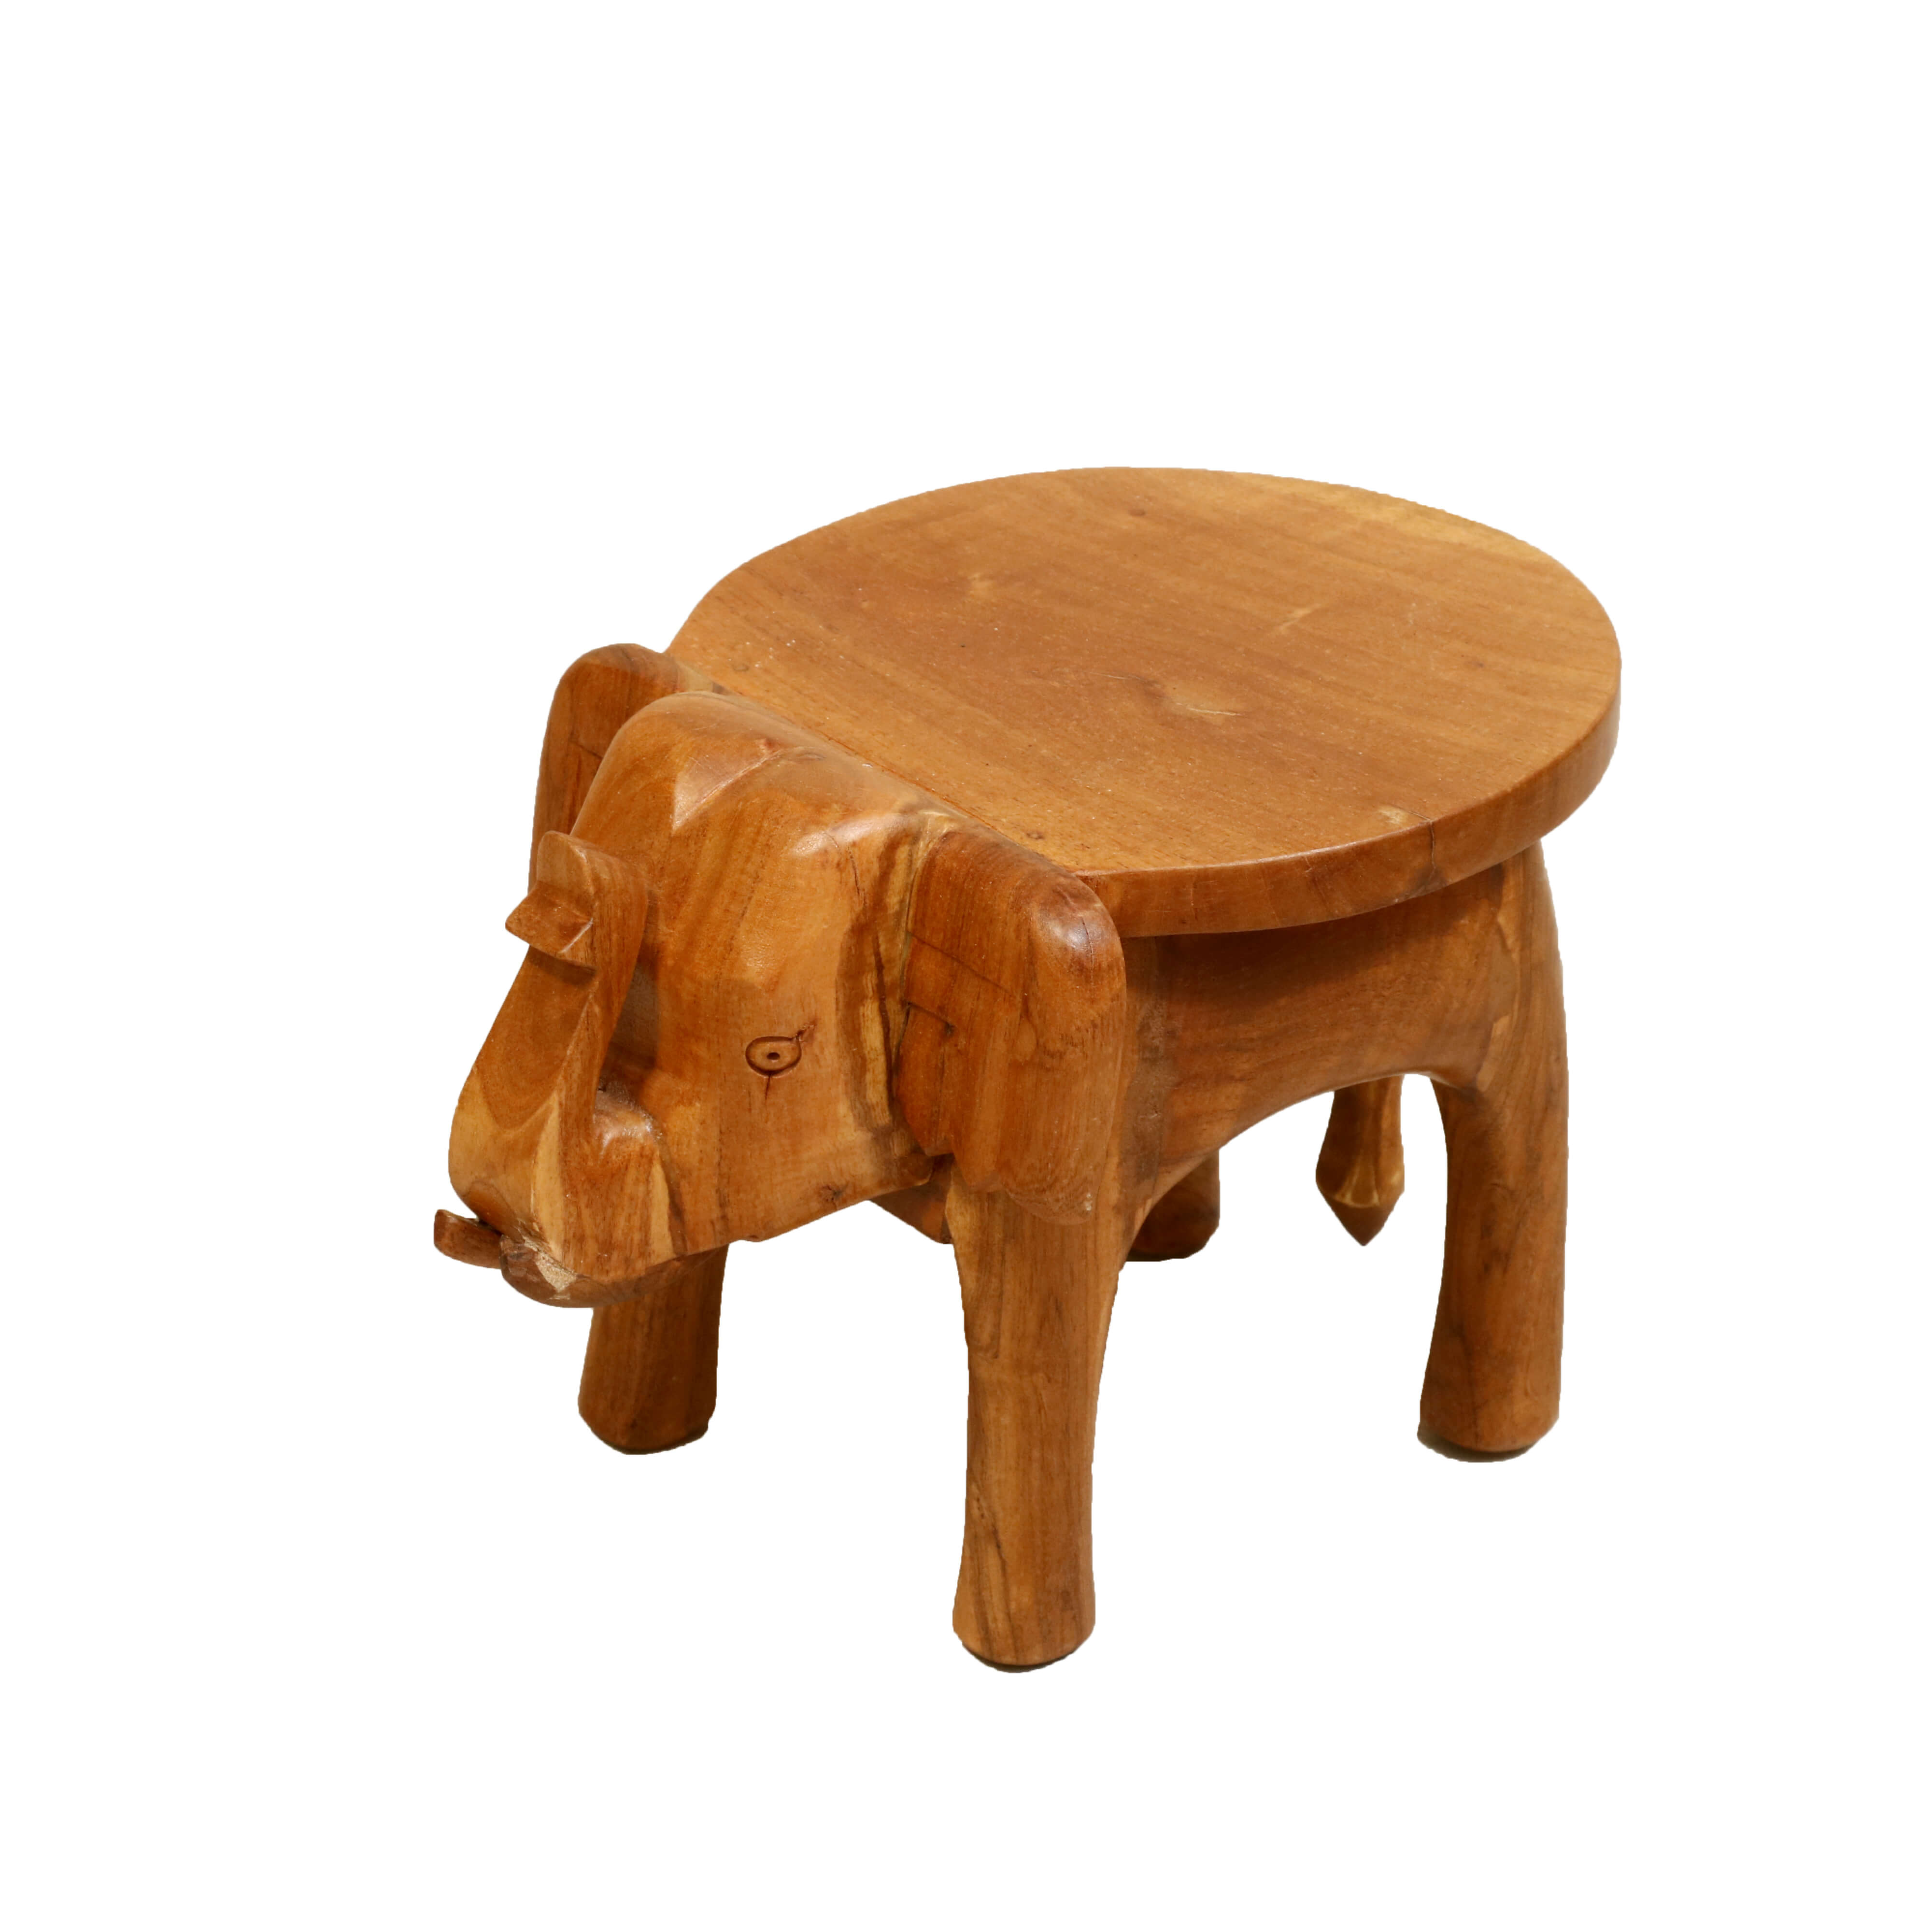 Wooden Tone Elephant Table Stand Large (12 x 17 x 12 Inch) Animal Figurine